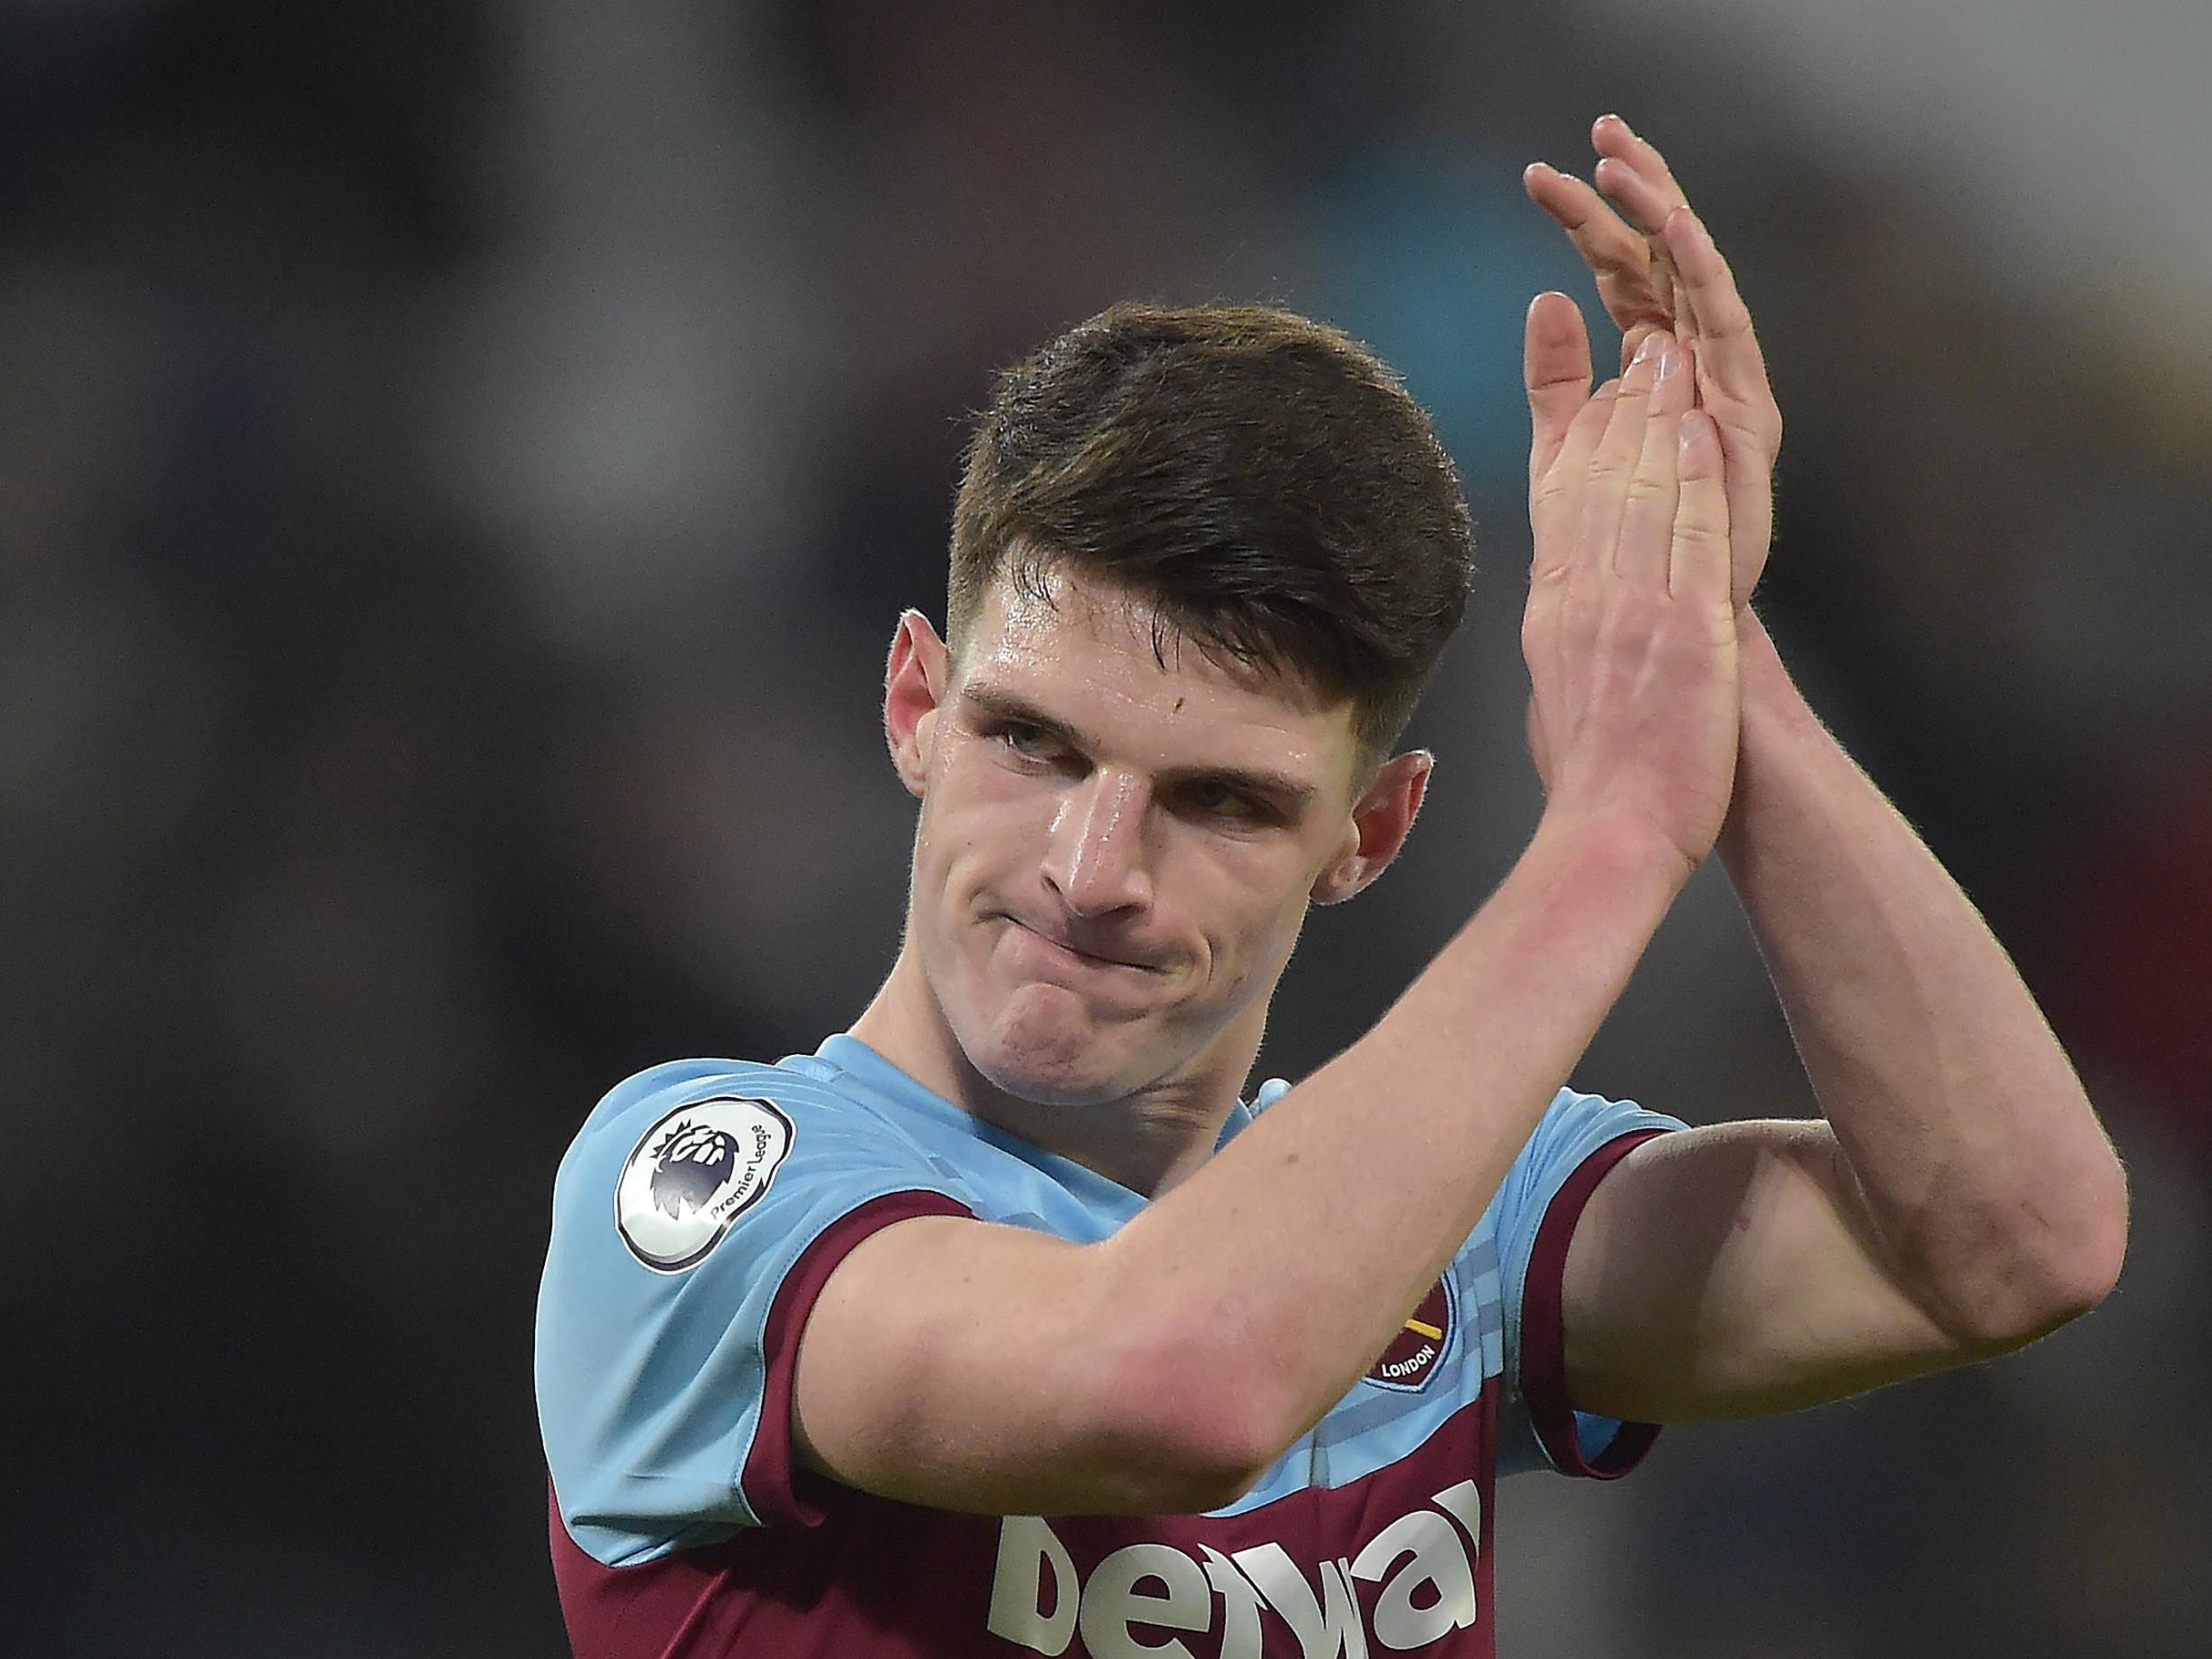 Declan Rice: Paul Merson urges Arsenal to sign Declan Rice ahead of Chelsea